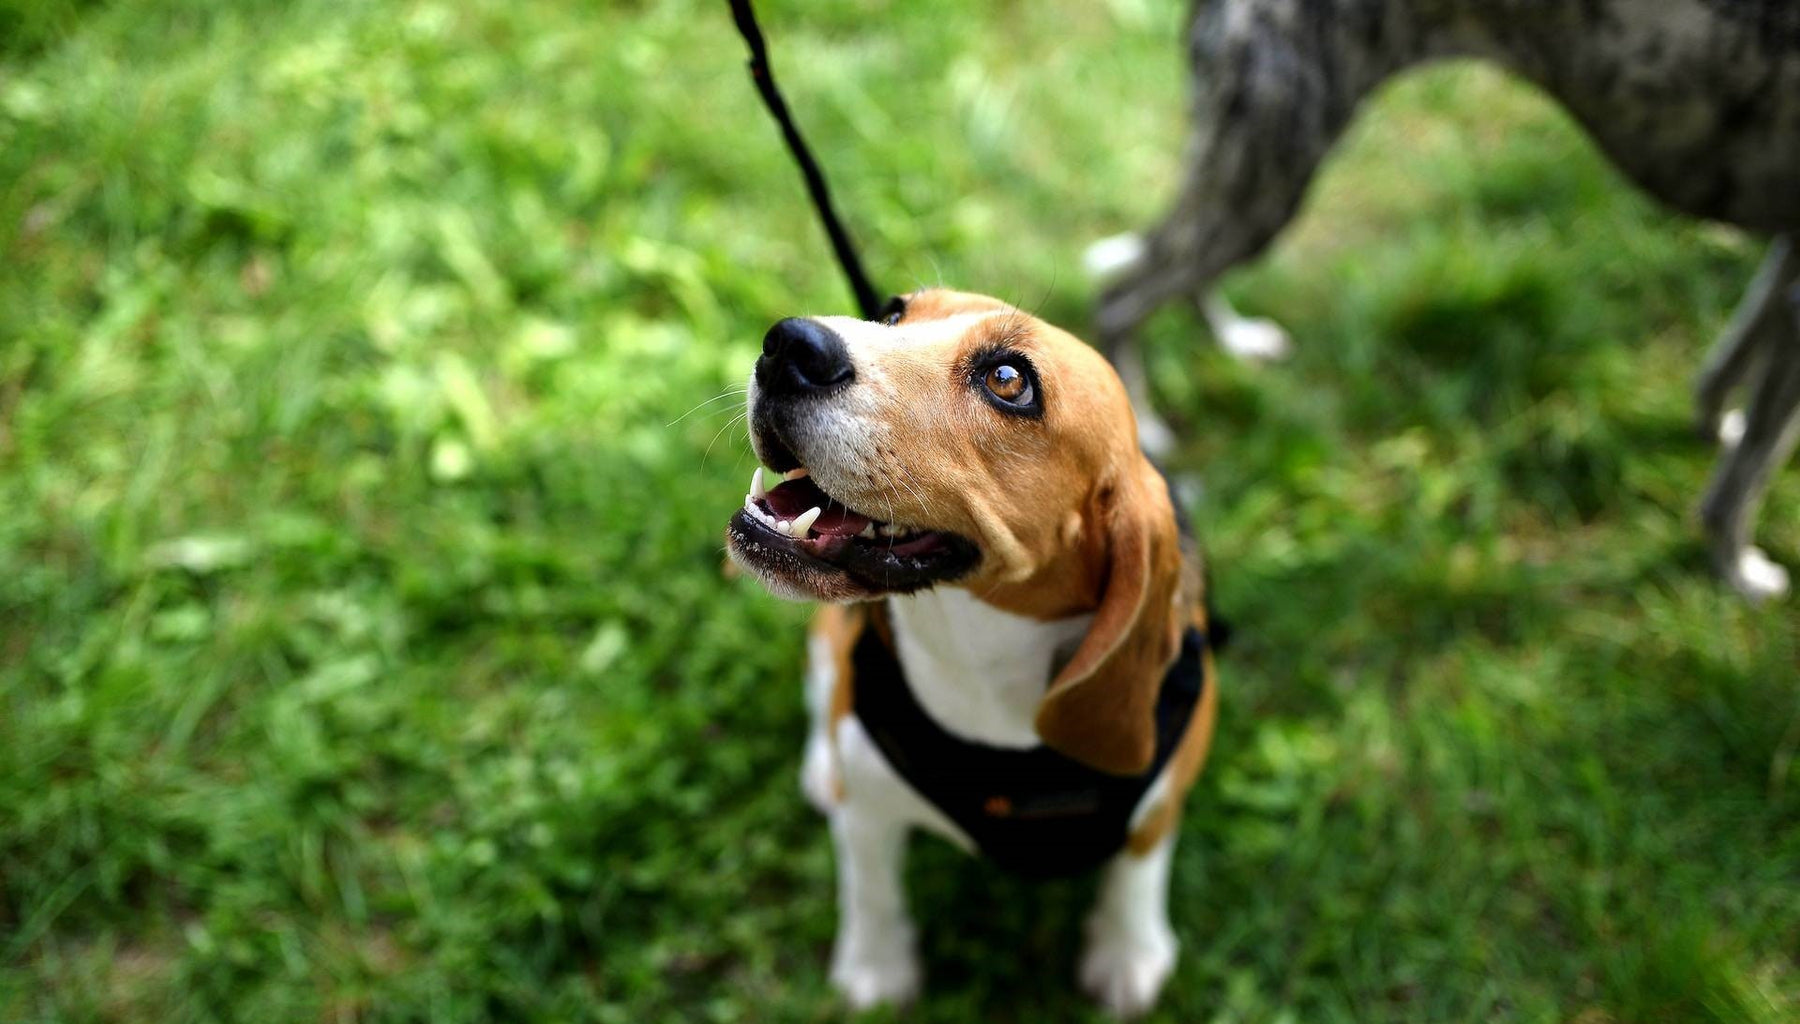 Leashed Beagle Looking Up